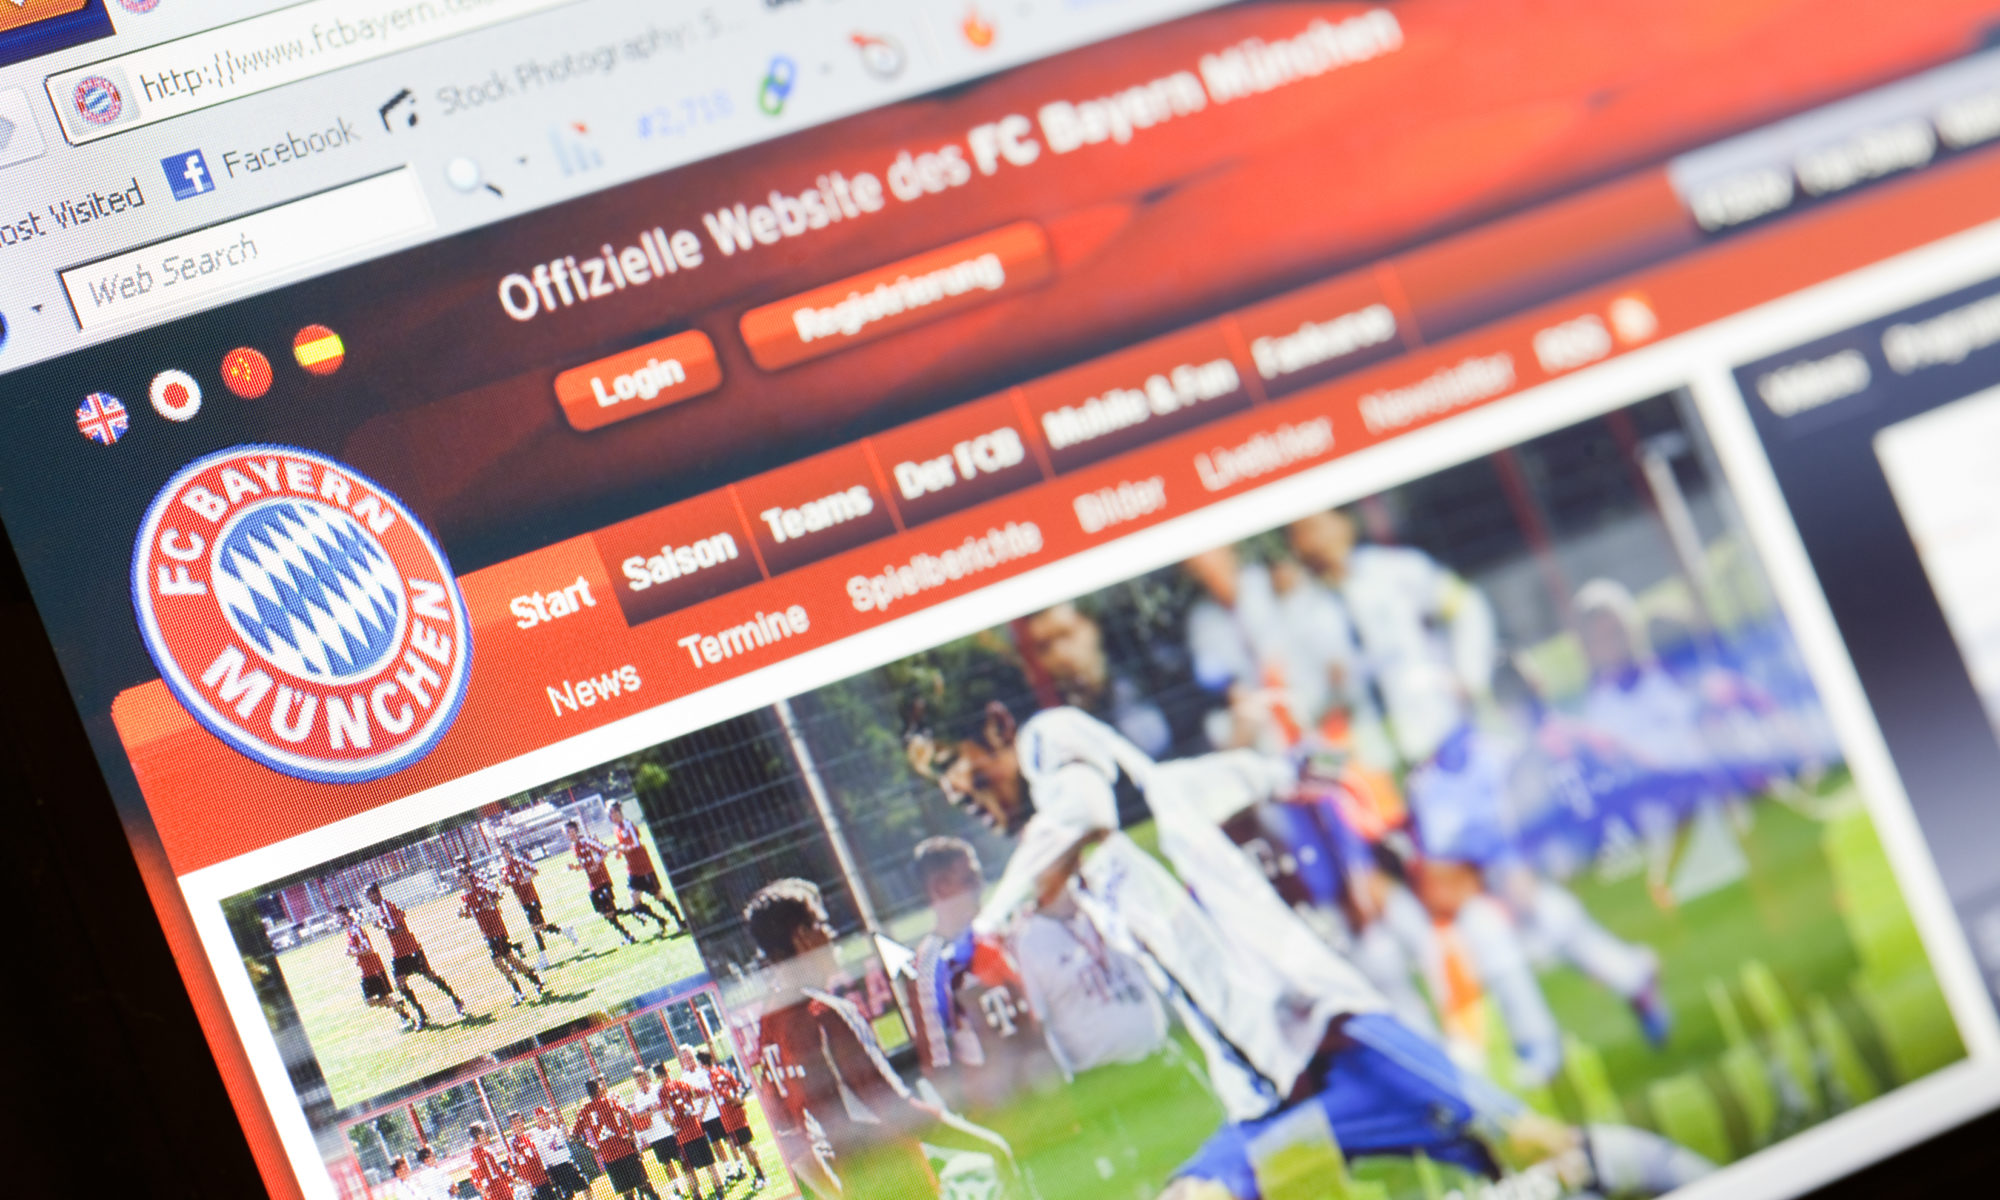 Homepage of Bayern Munich, the largest soccer club in Germany using Go Sitebuilder for sport fans.